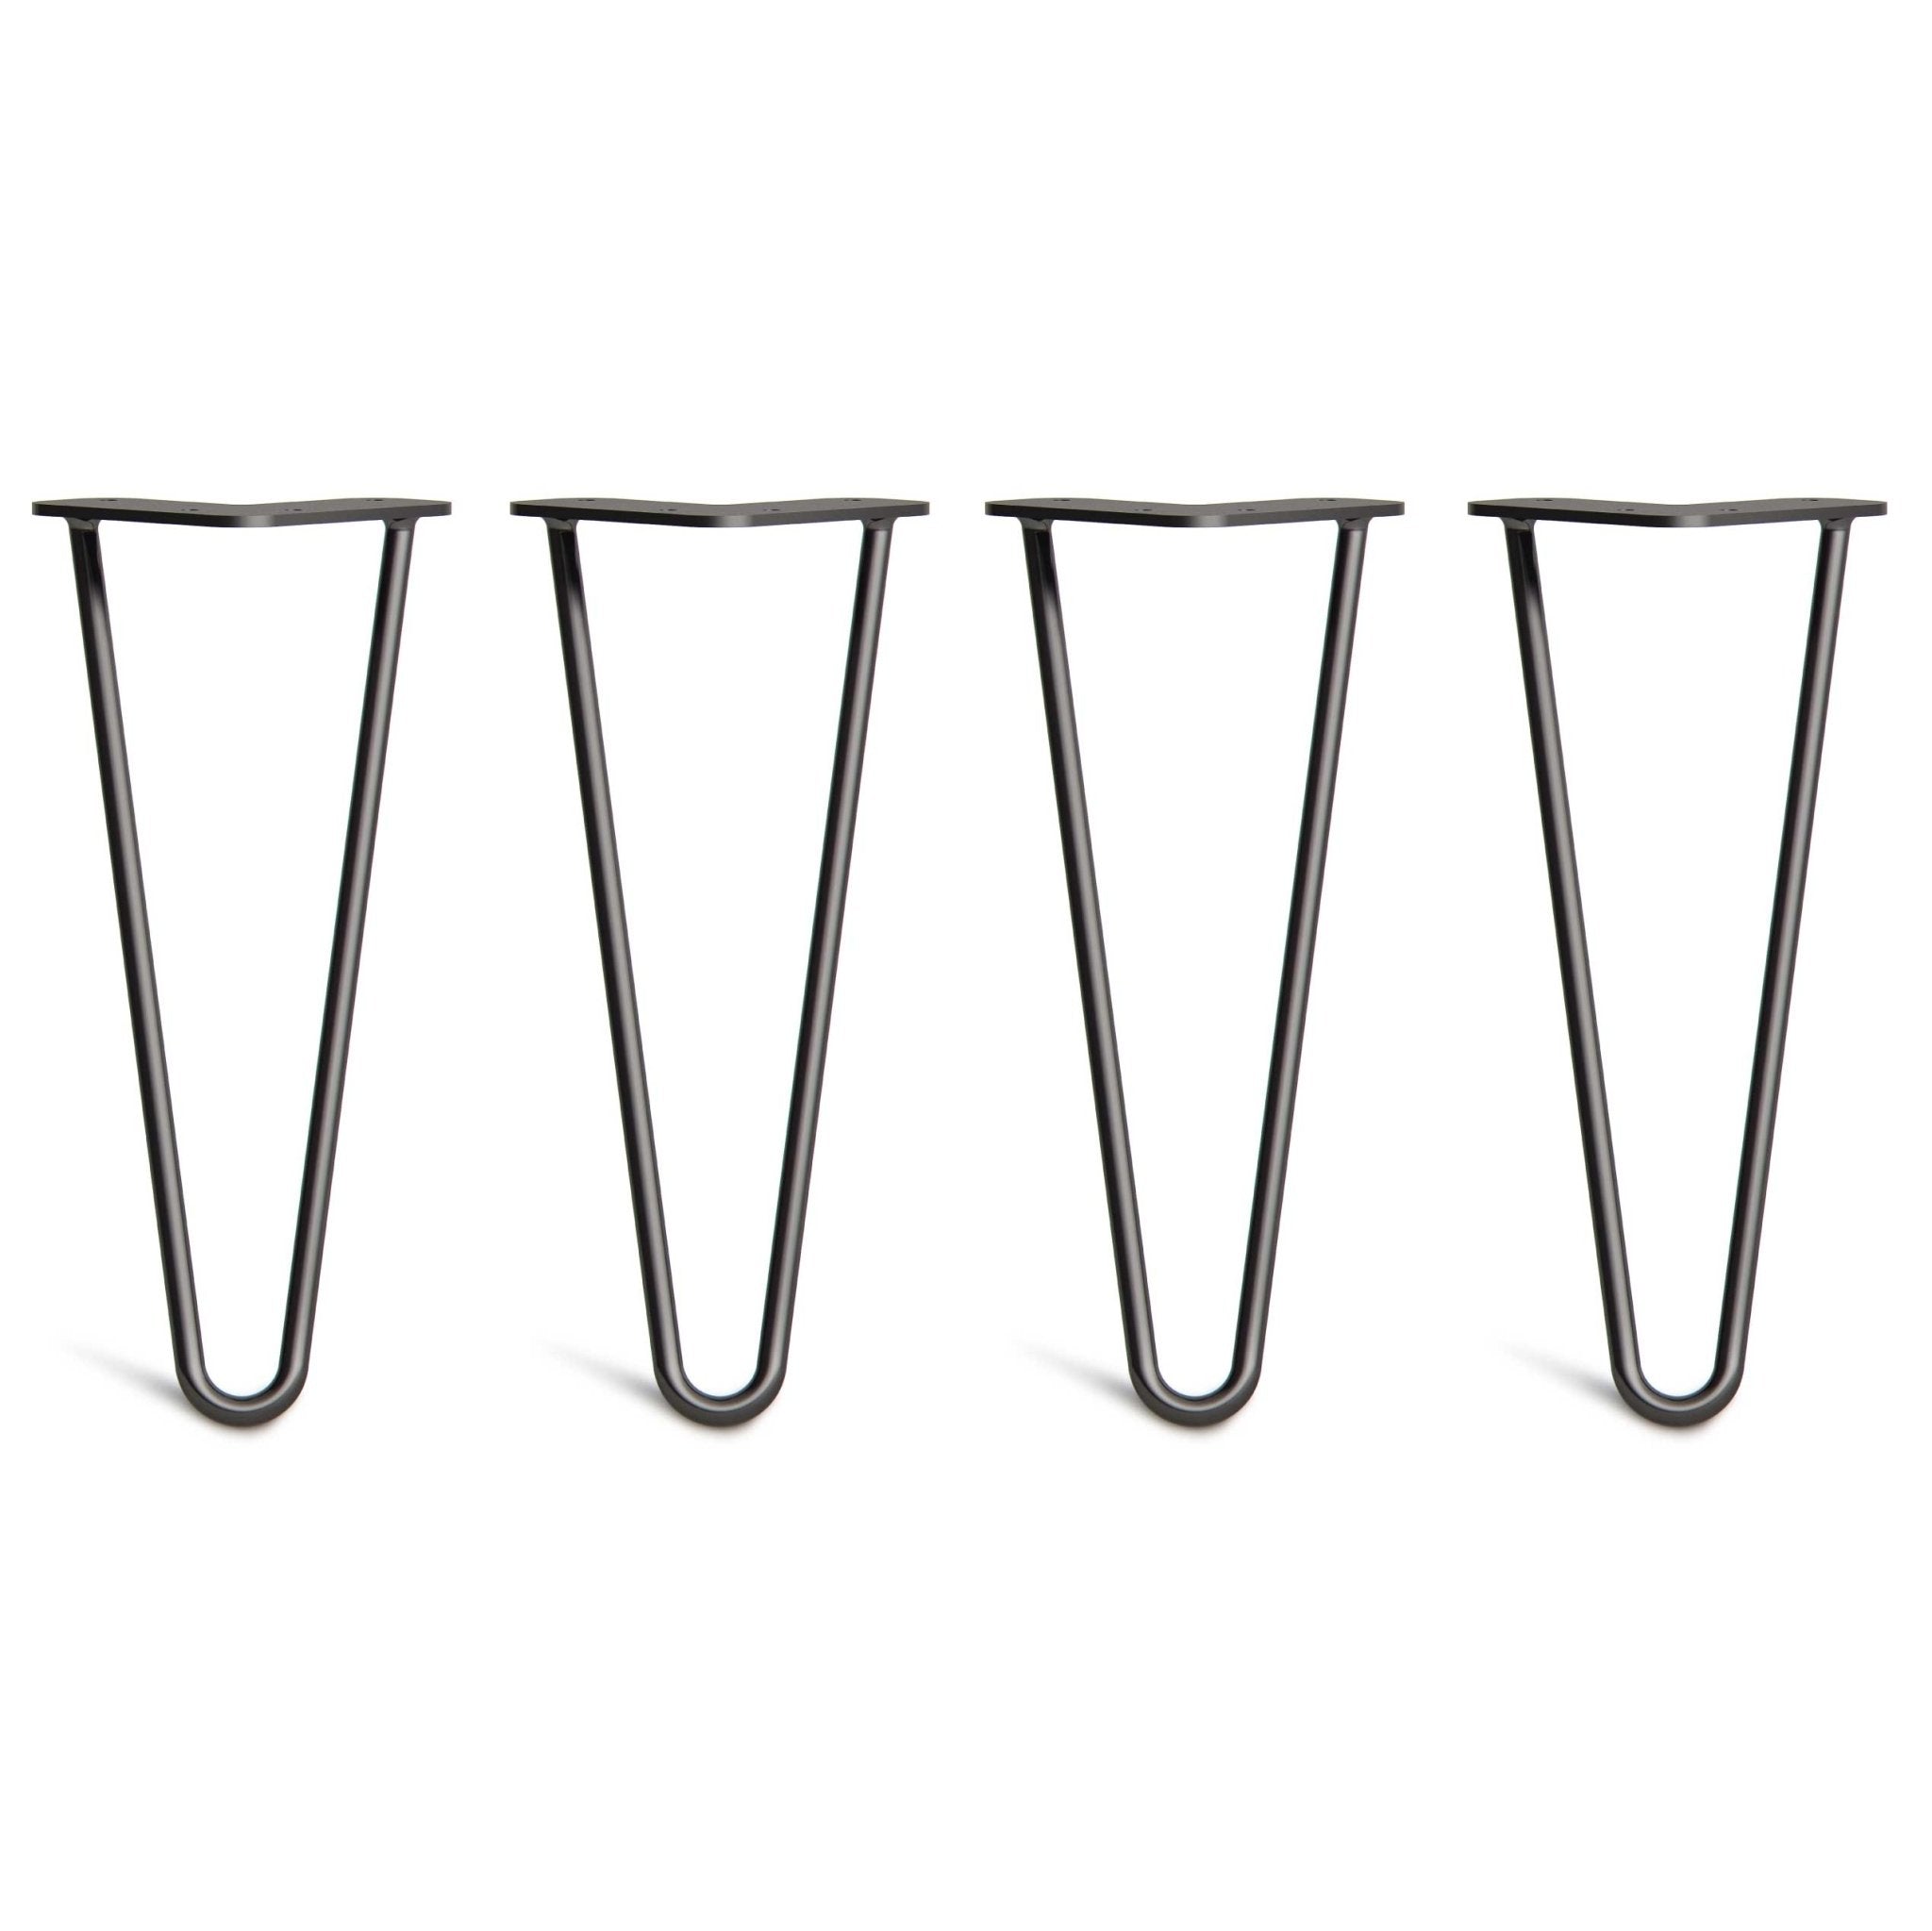 30cm Hairpin Legs - Low Coffee Table-2 Rod-Black-The Hairpin Leg Co.